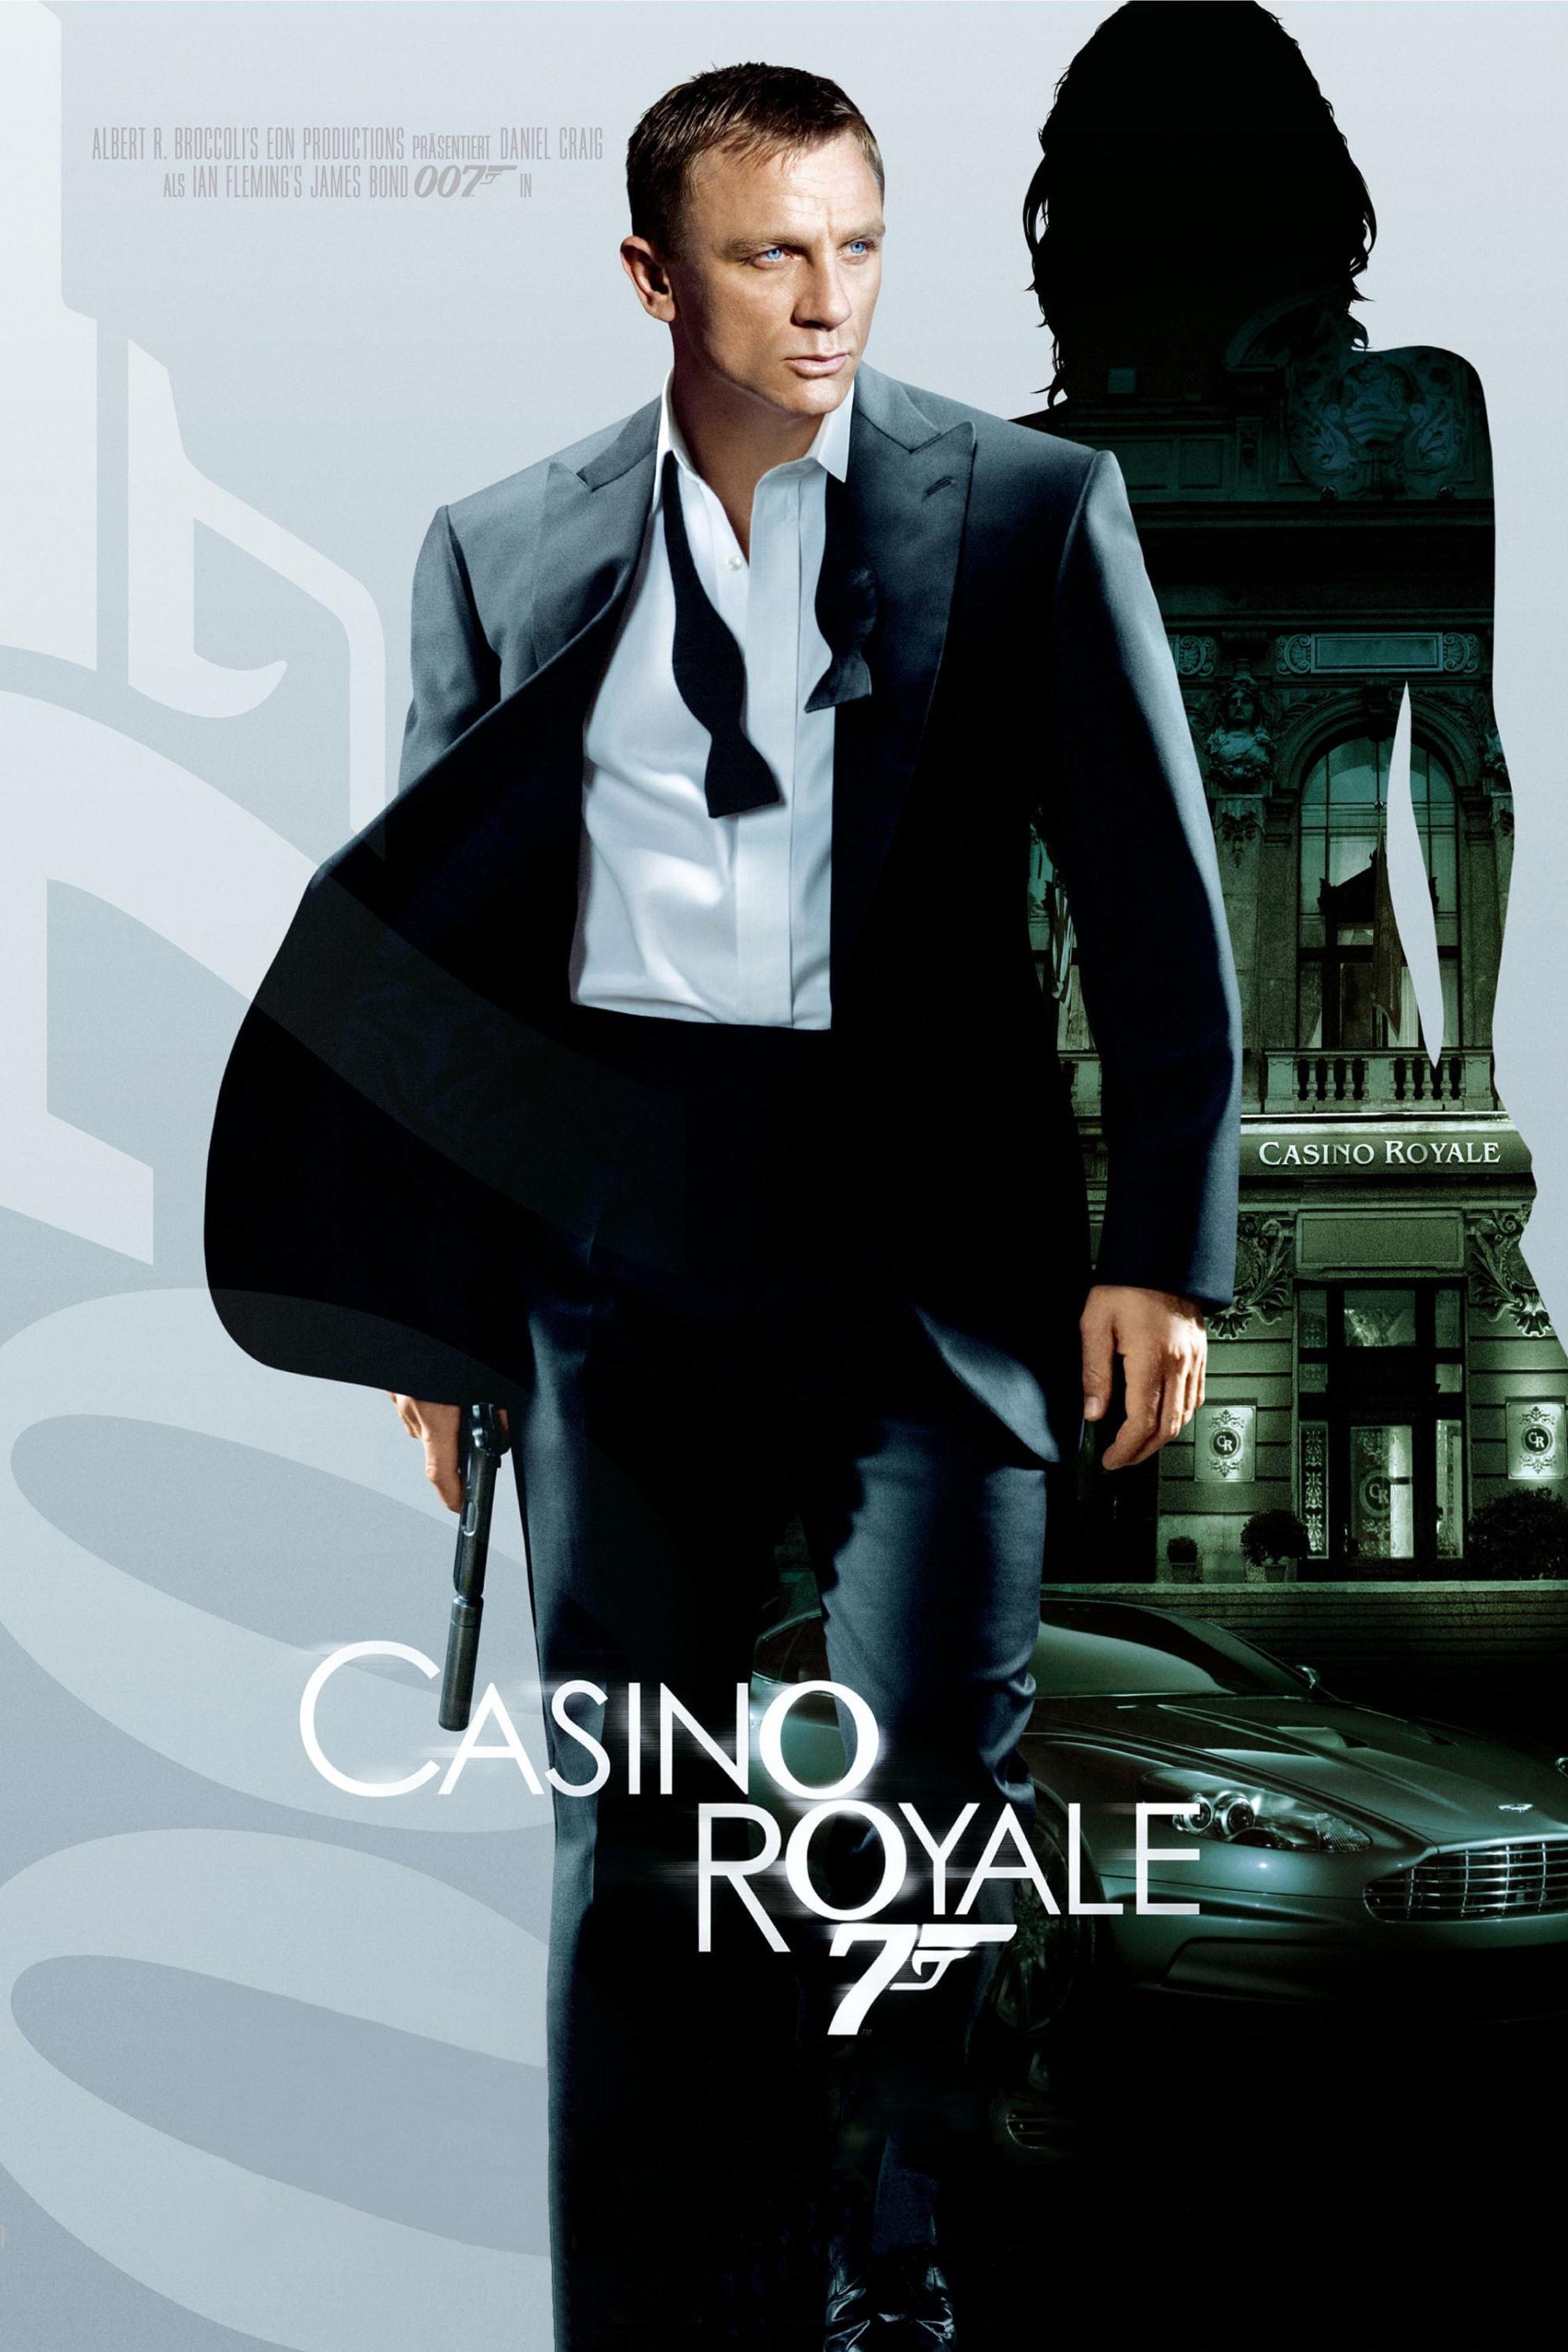 casino royal 007 date issued